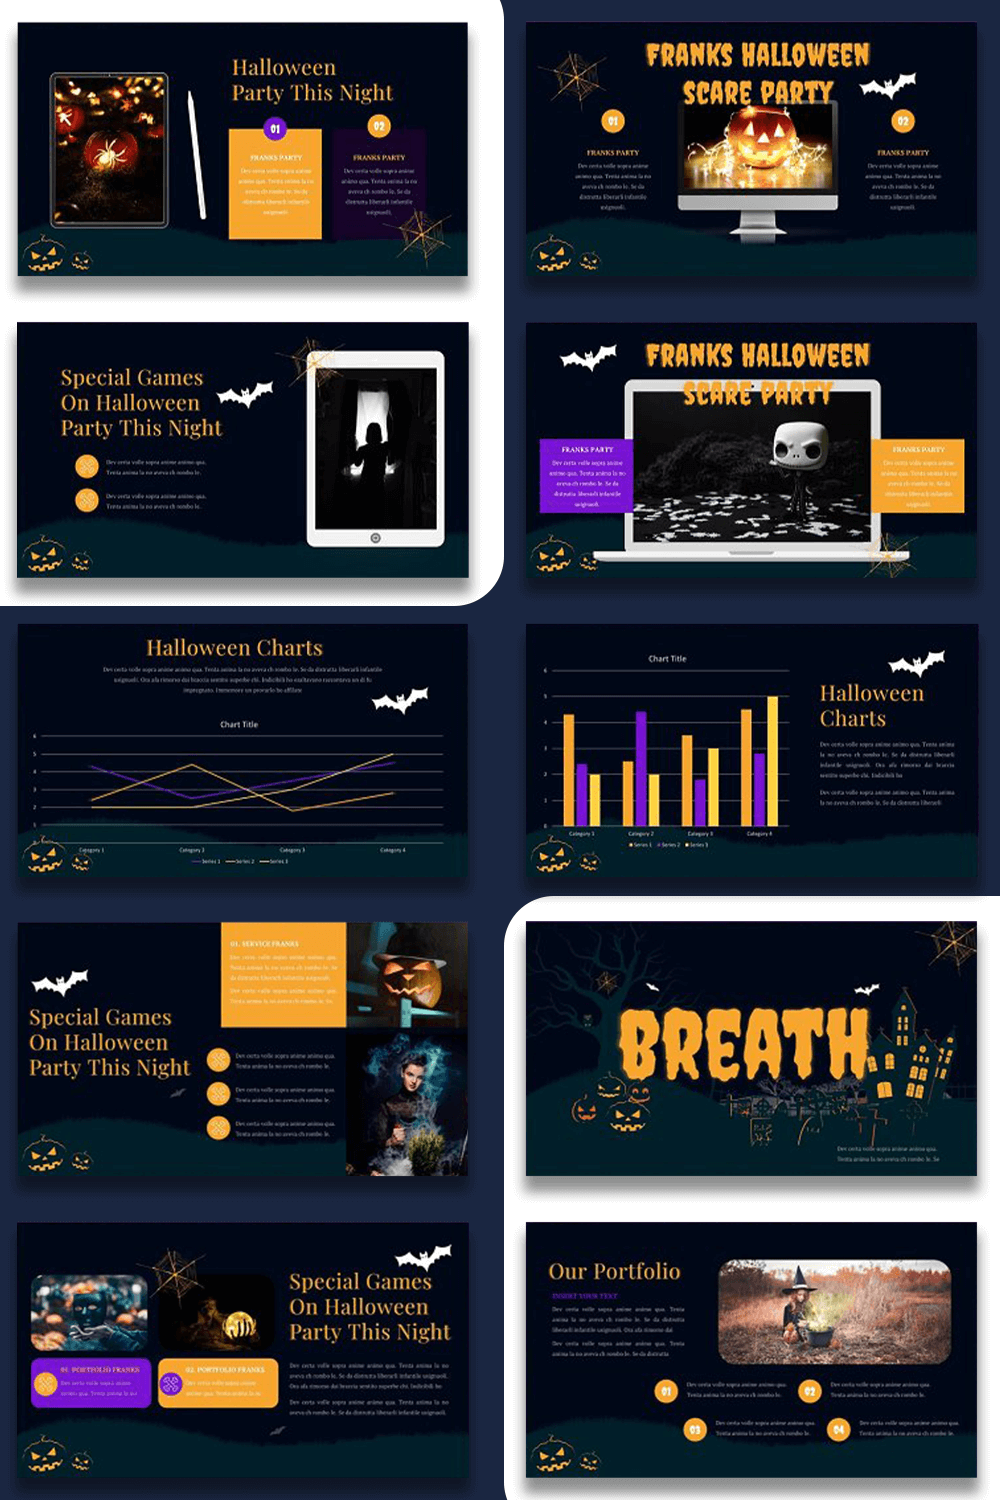 Beautiful slides for your presentation.